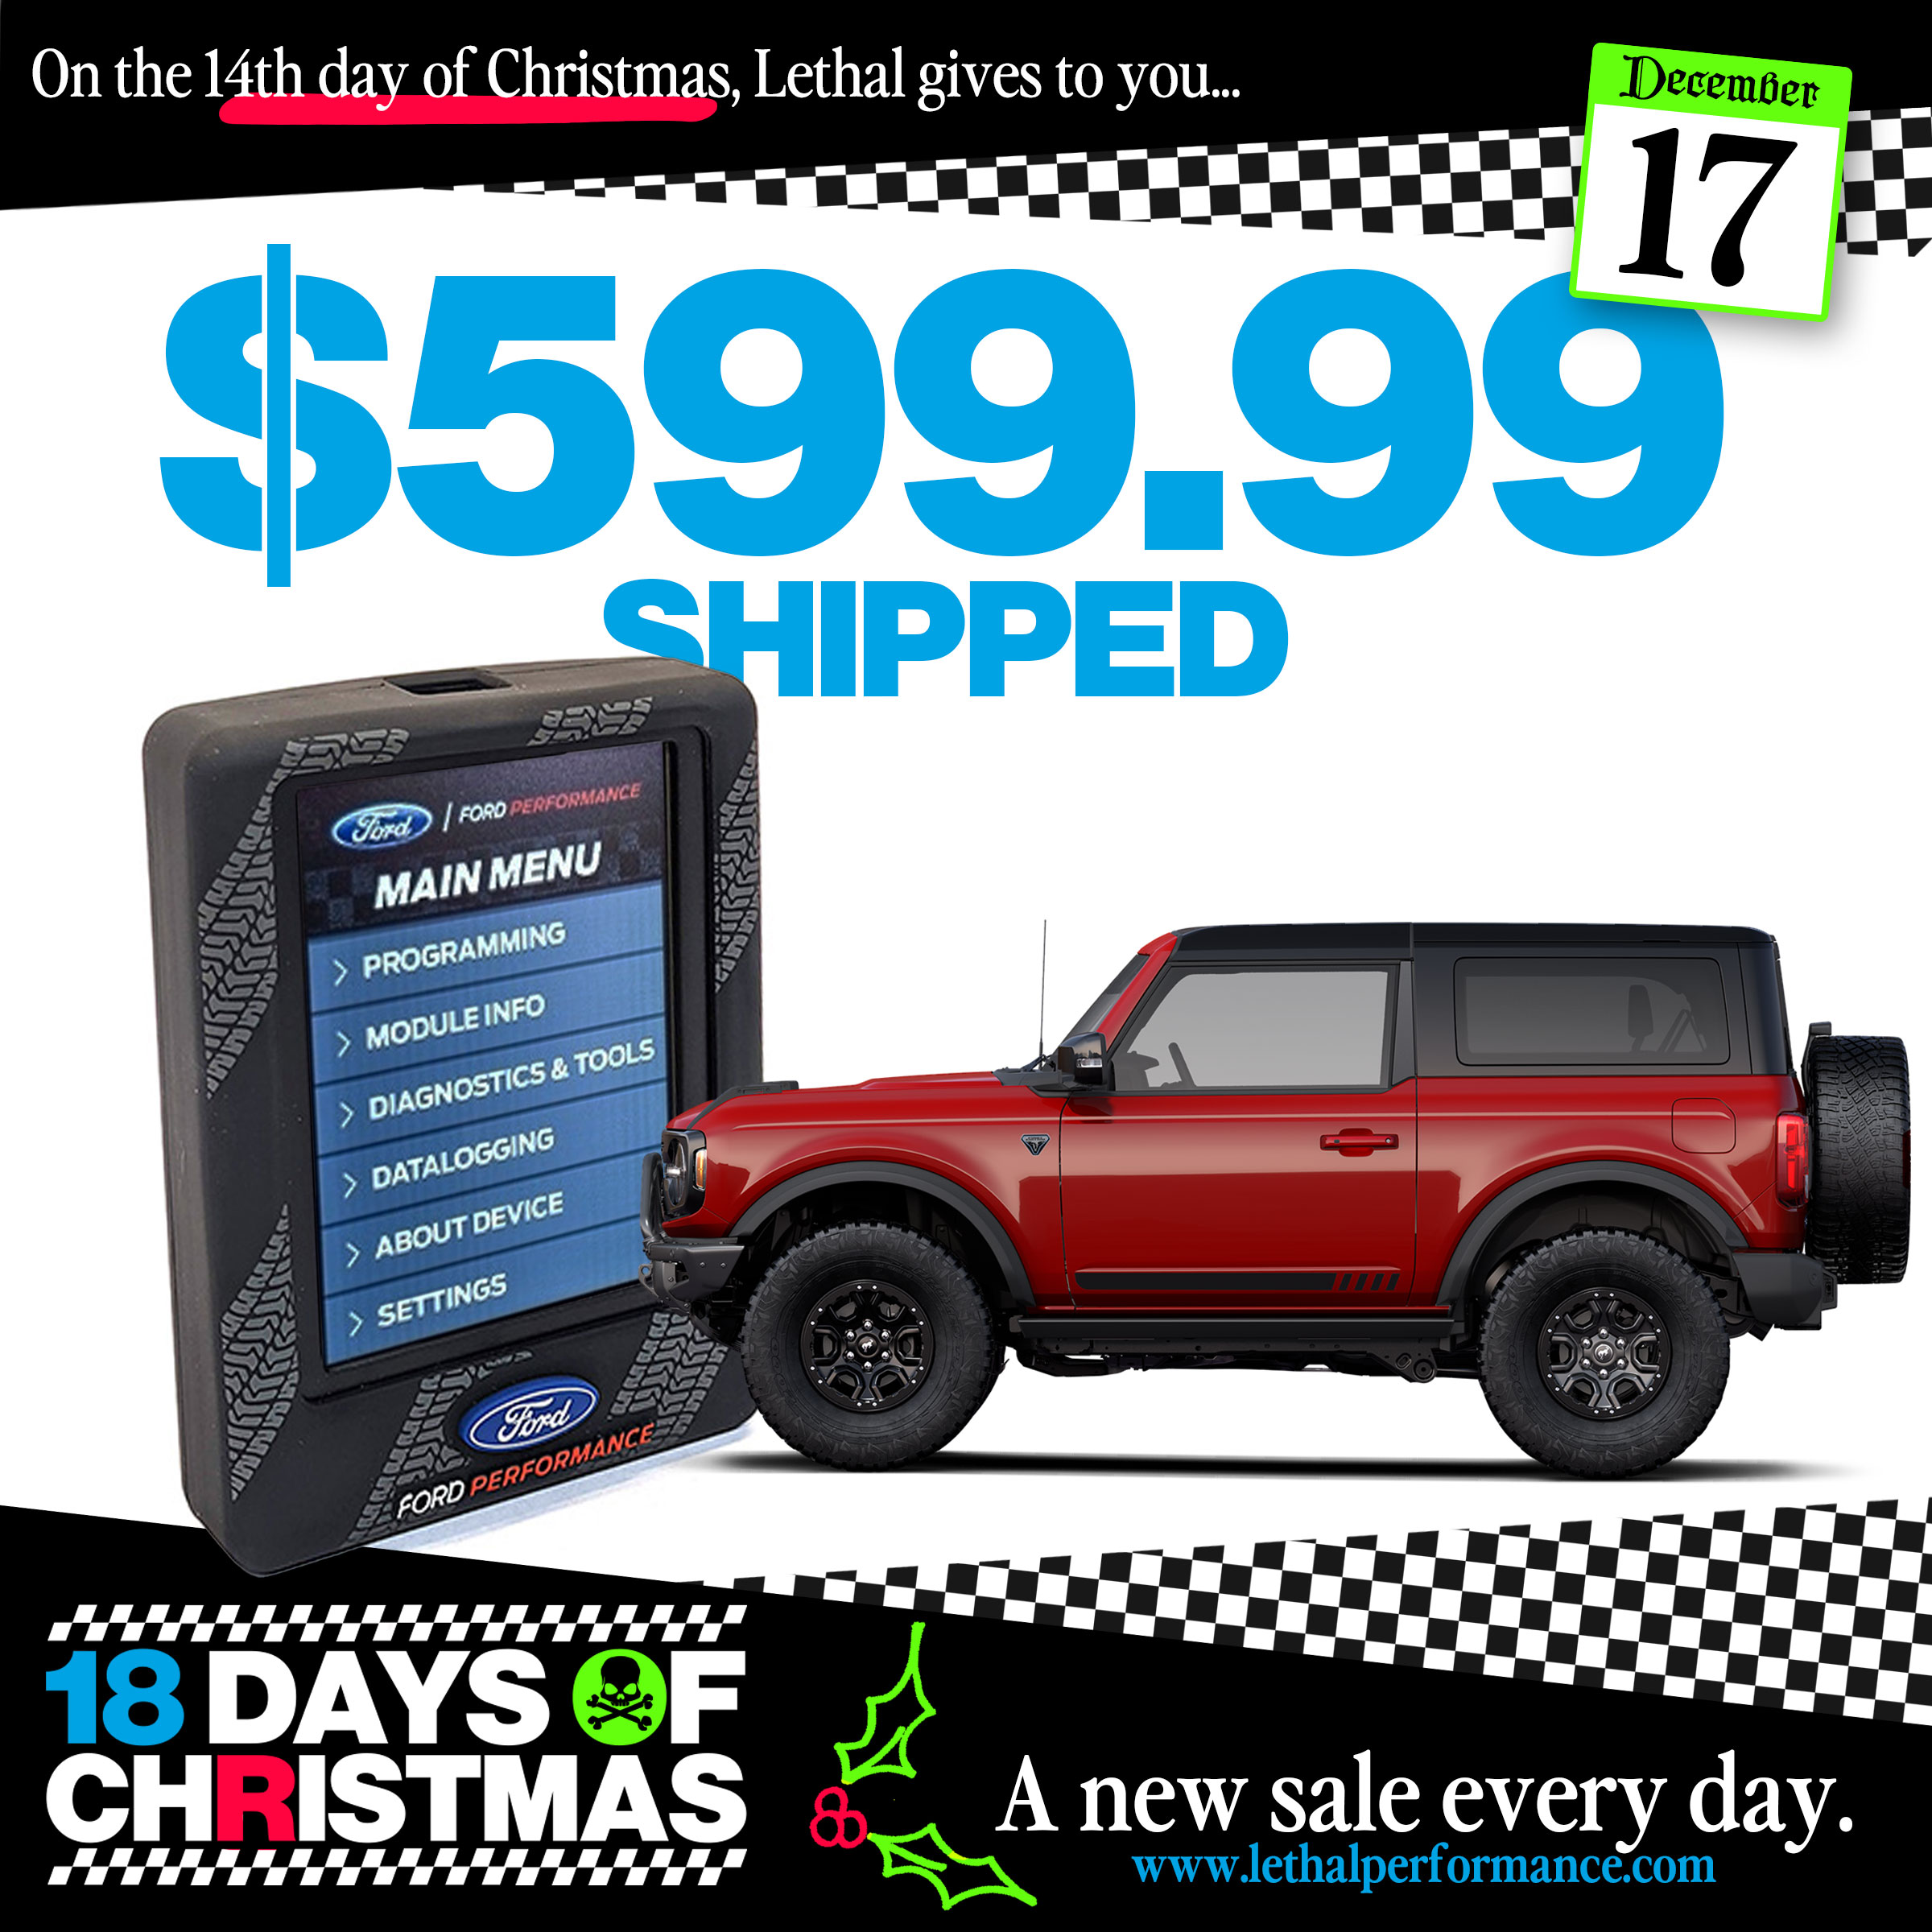 Ford Bronco Ford Performance Calibration Sale ENDS TODAY! - Lethal Performance ford-pro-cal-alst-